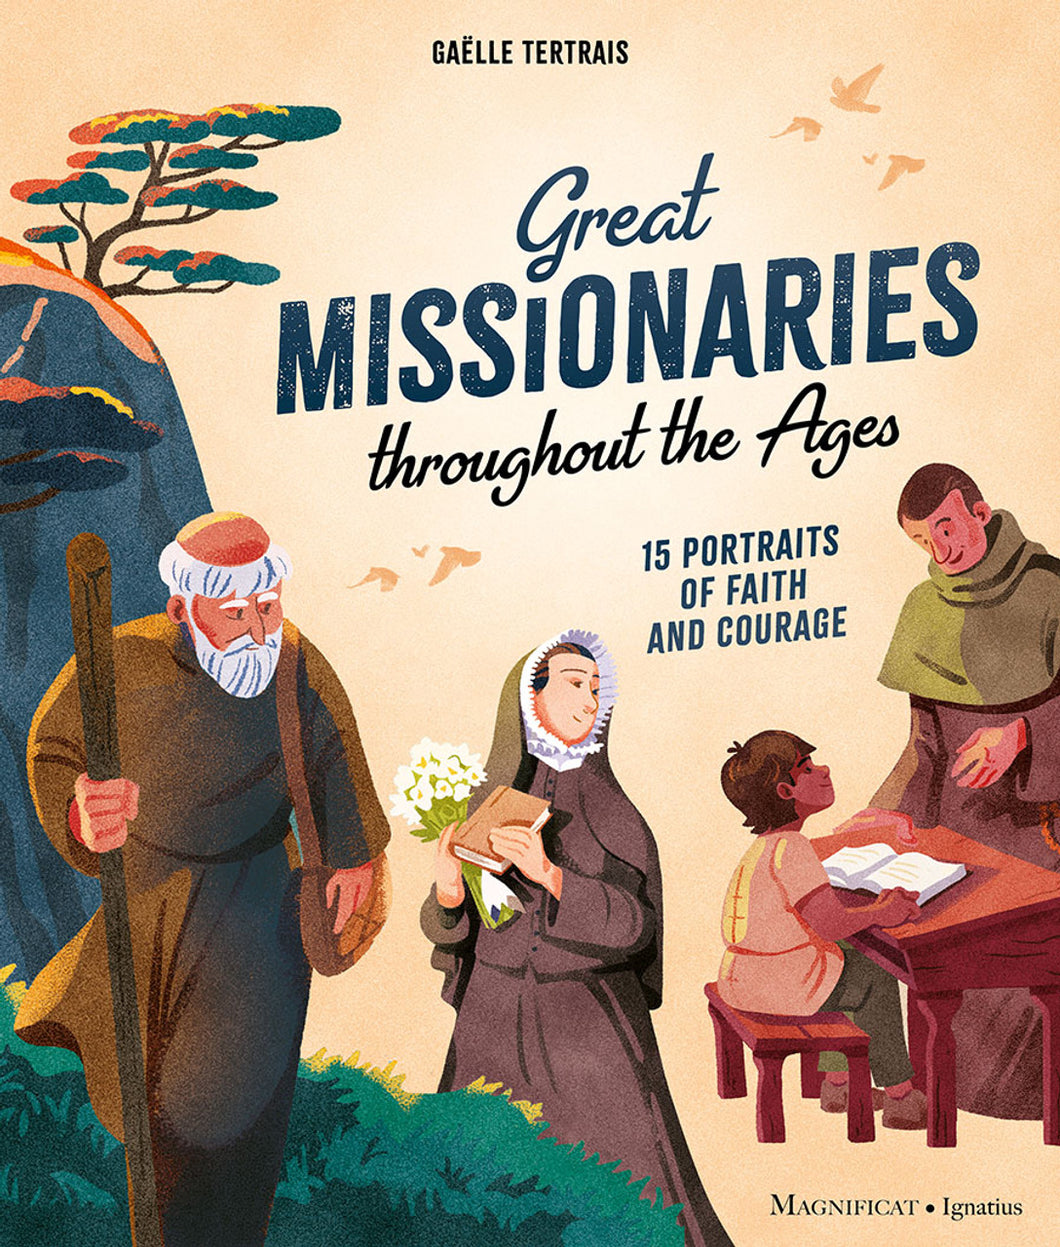 Great Missionaries throughout the Ages: 15 Portraits of Faith and Courage